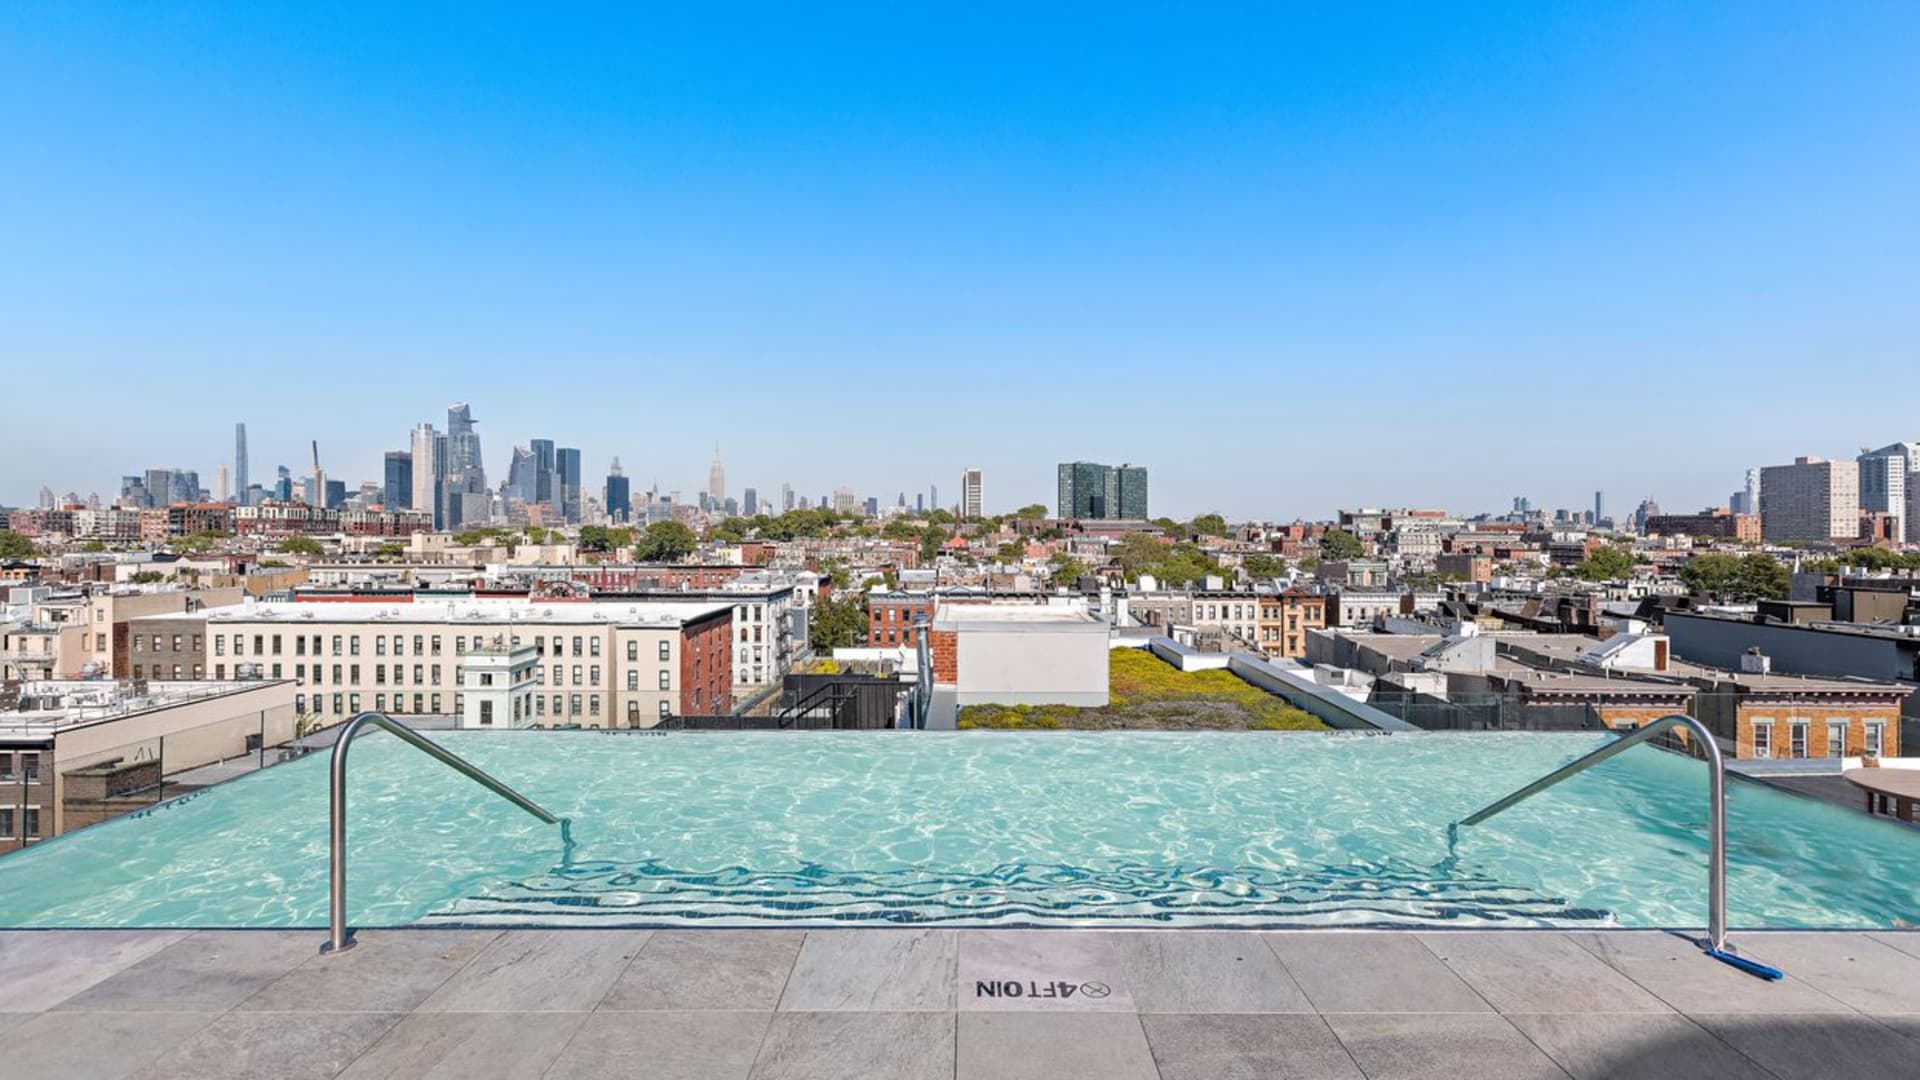 The rooftop pool has amazing views of different parts of New York City and New Jersey.